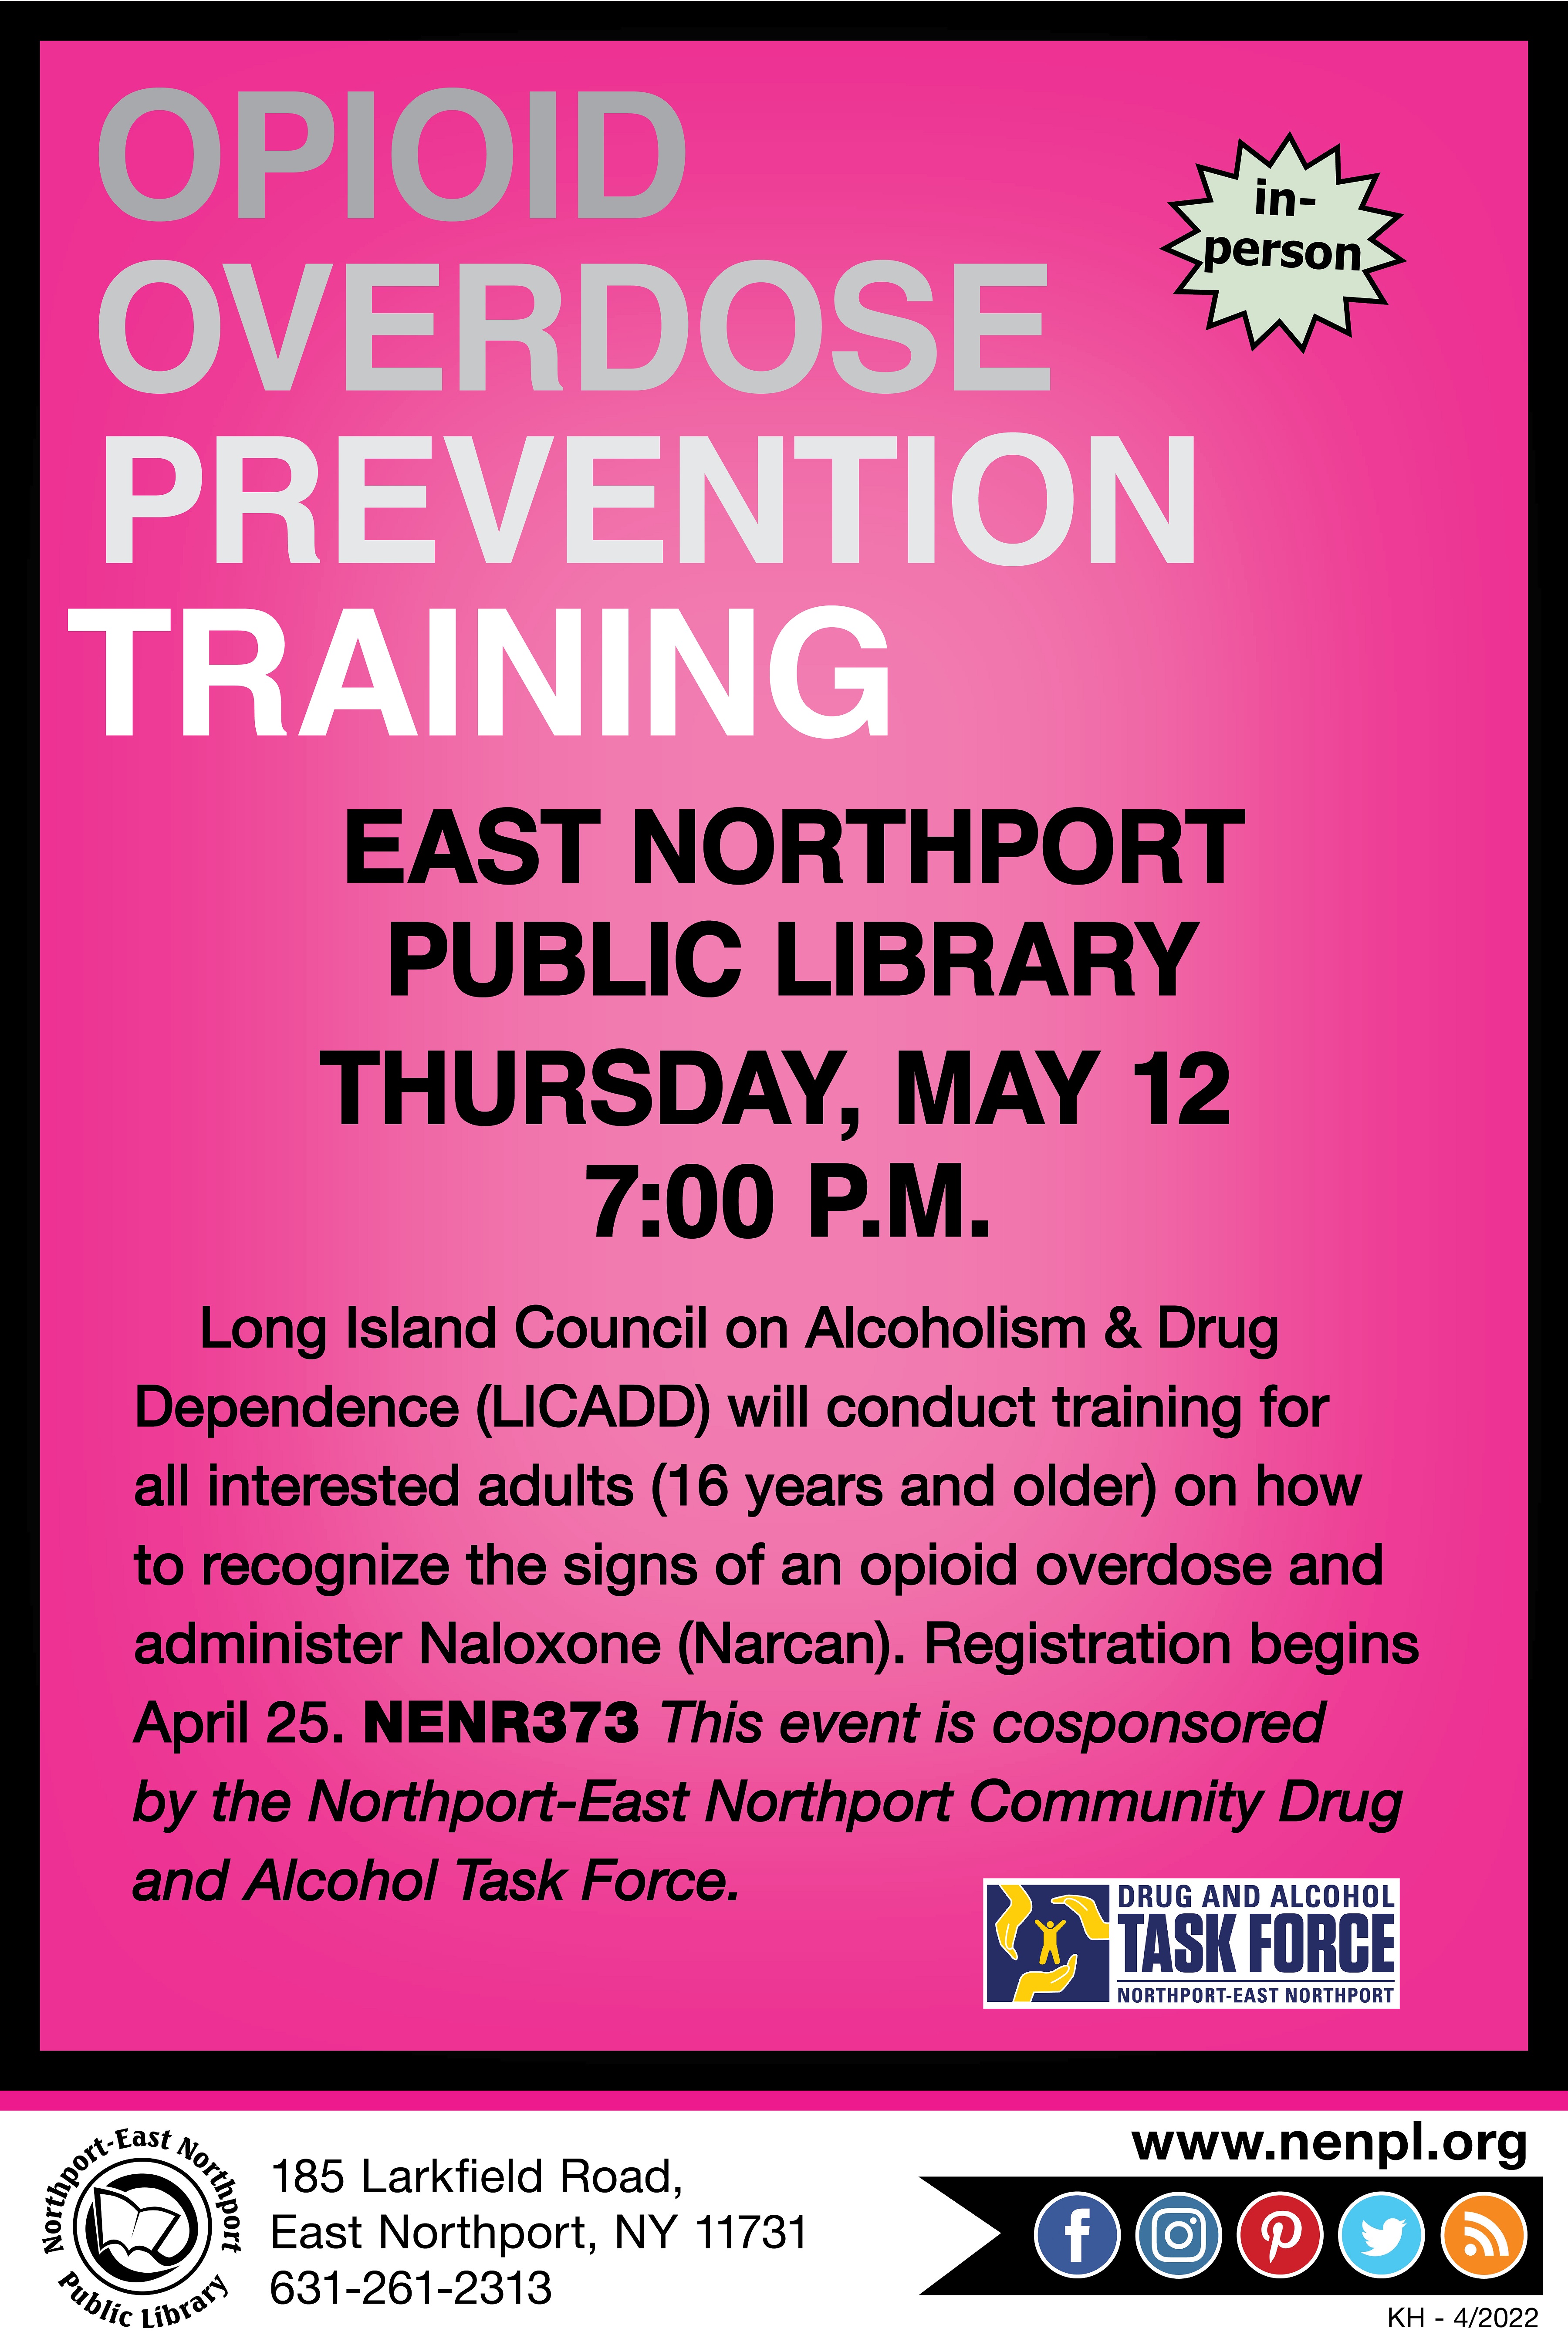 A flyer for Opioid Overdose Prevention Training